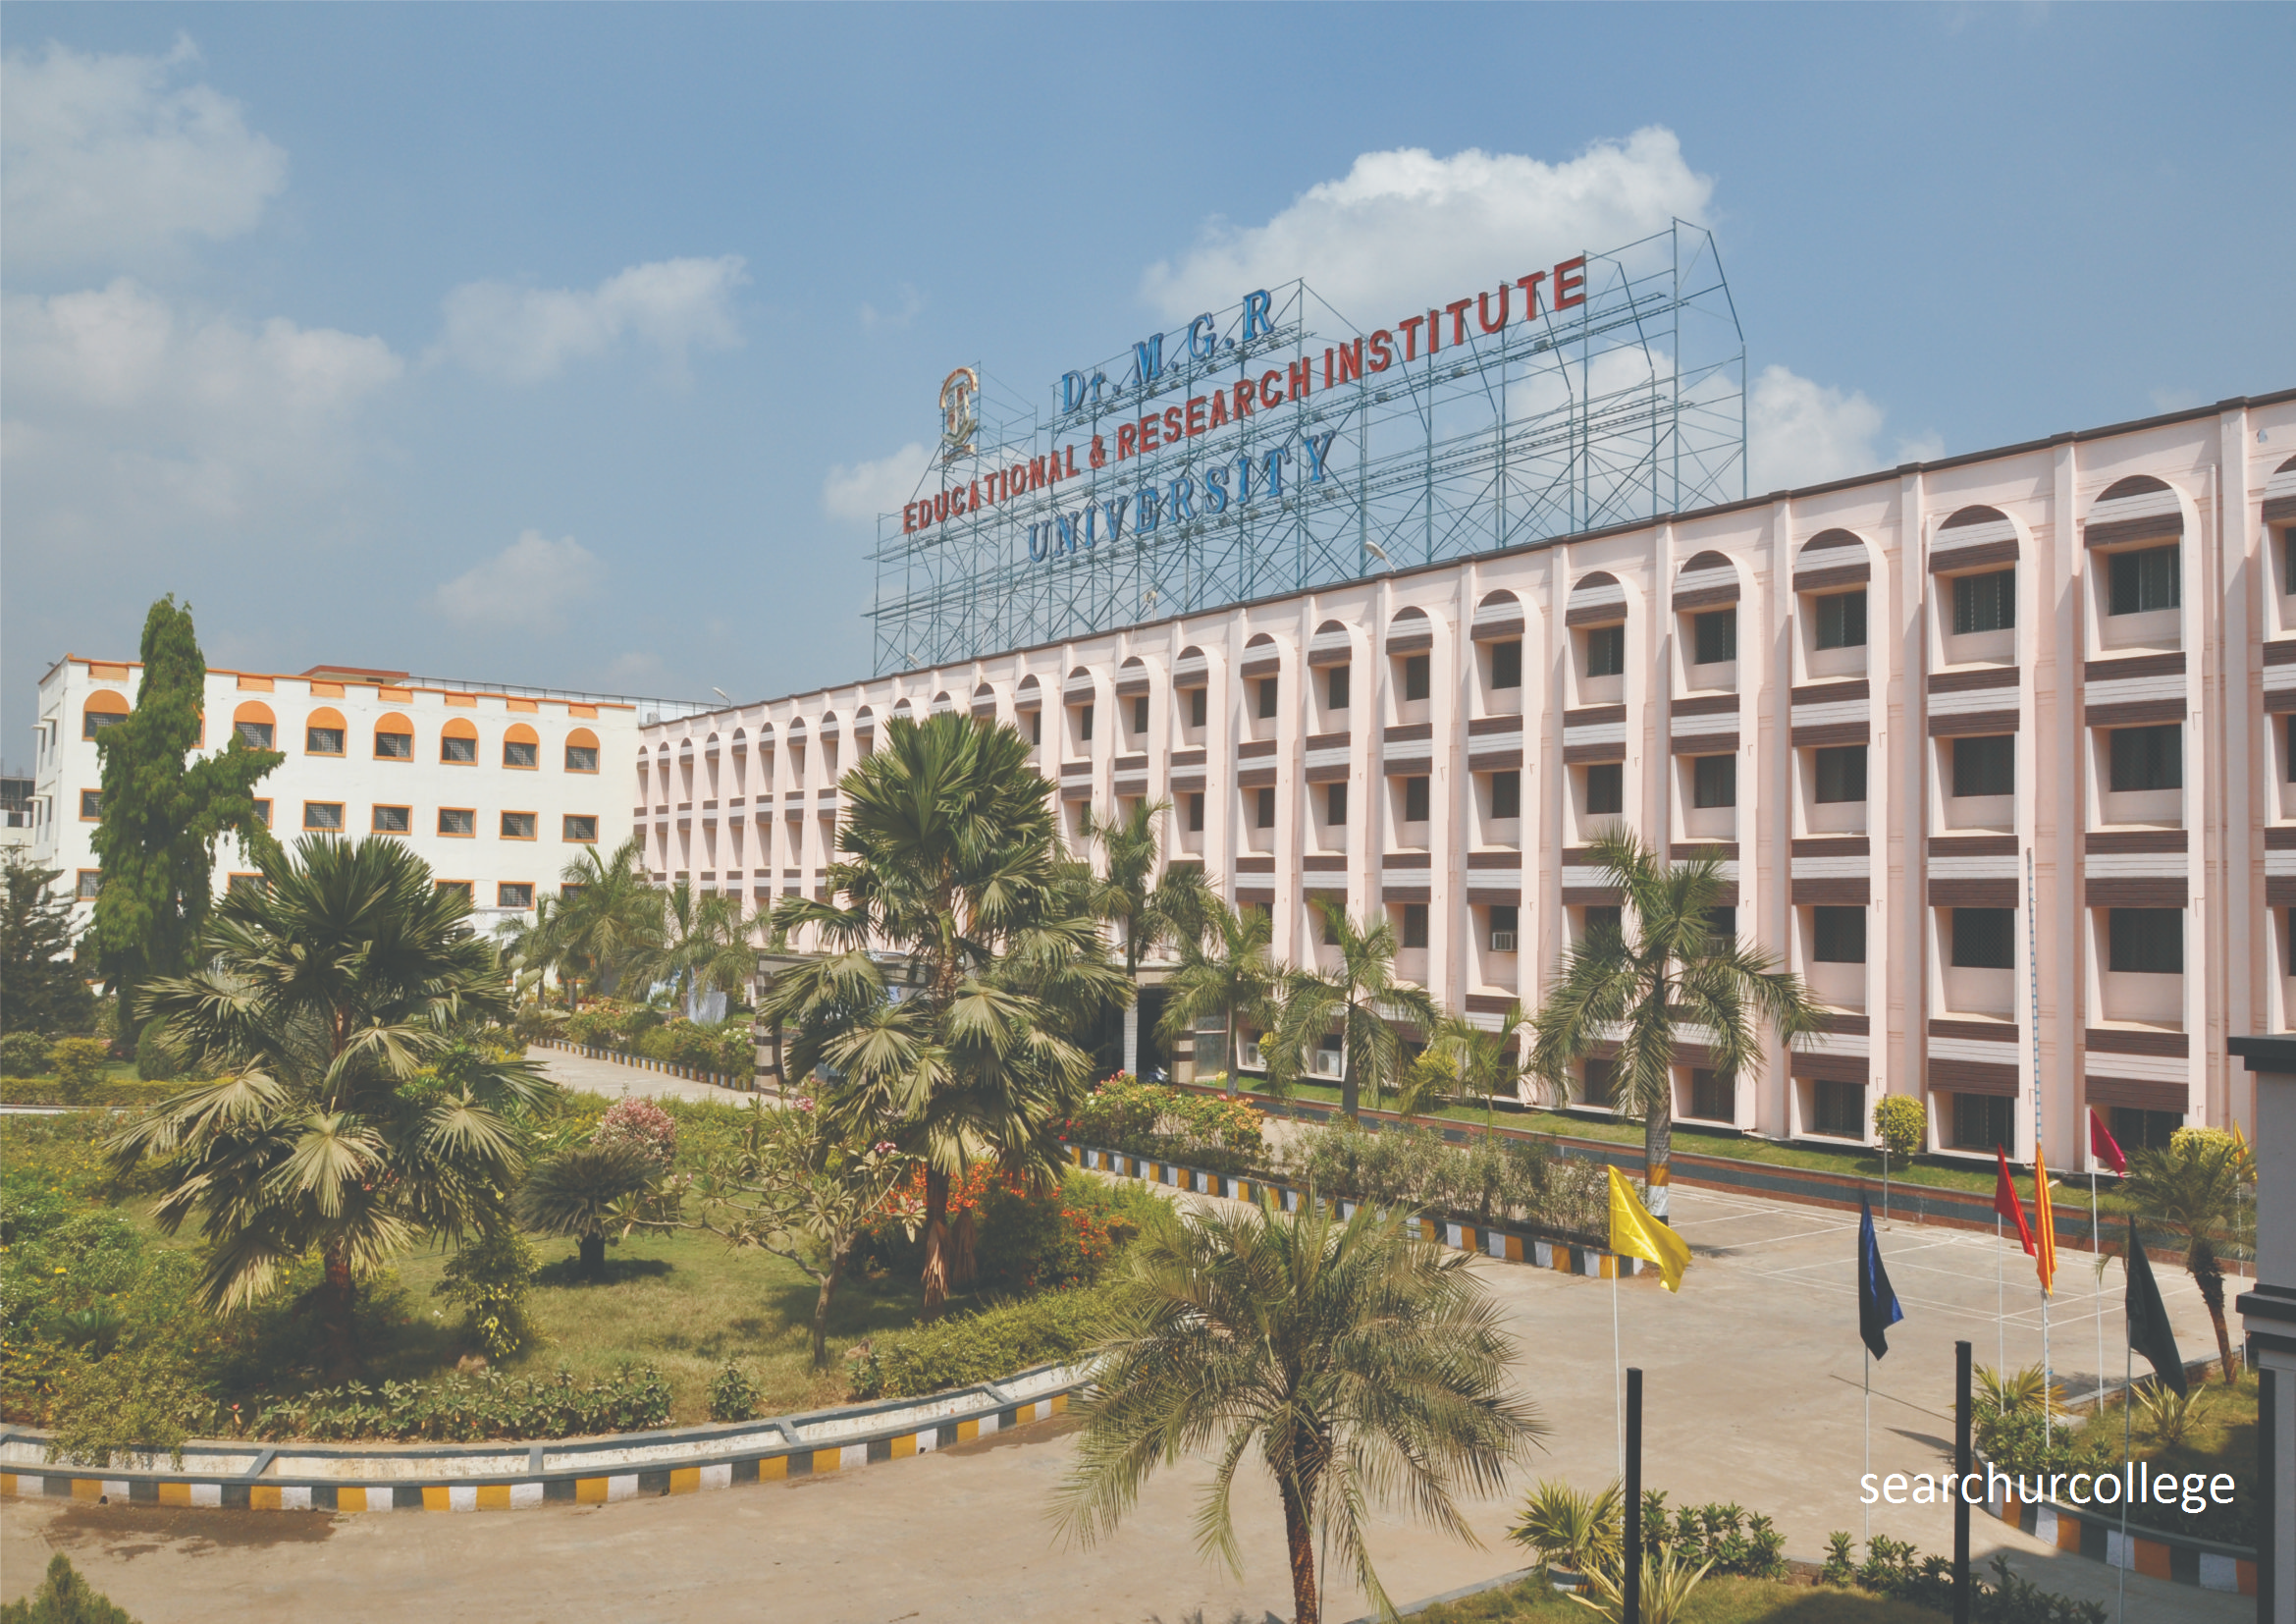 dr. m.g.r. educational and research institute chennai